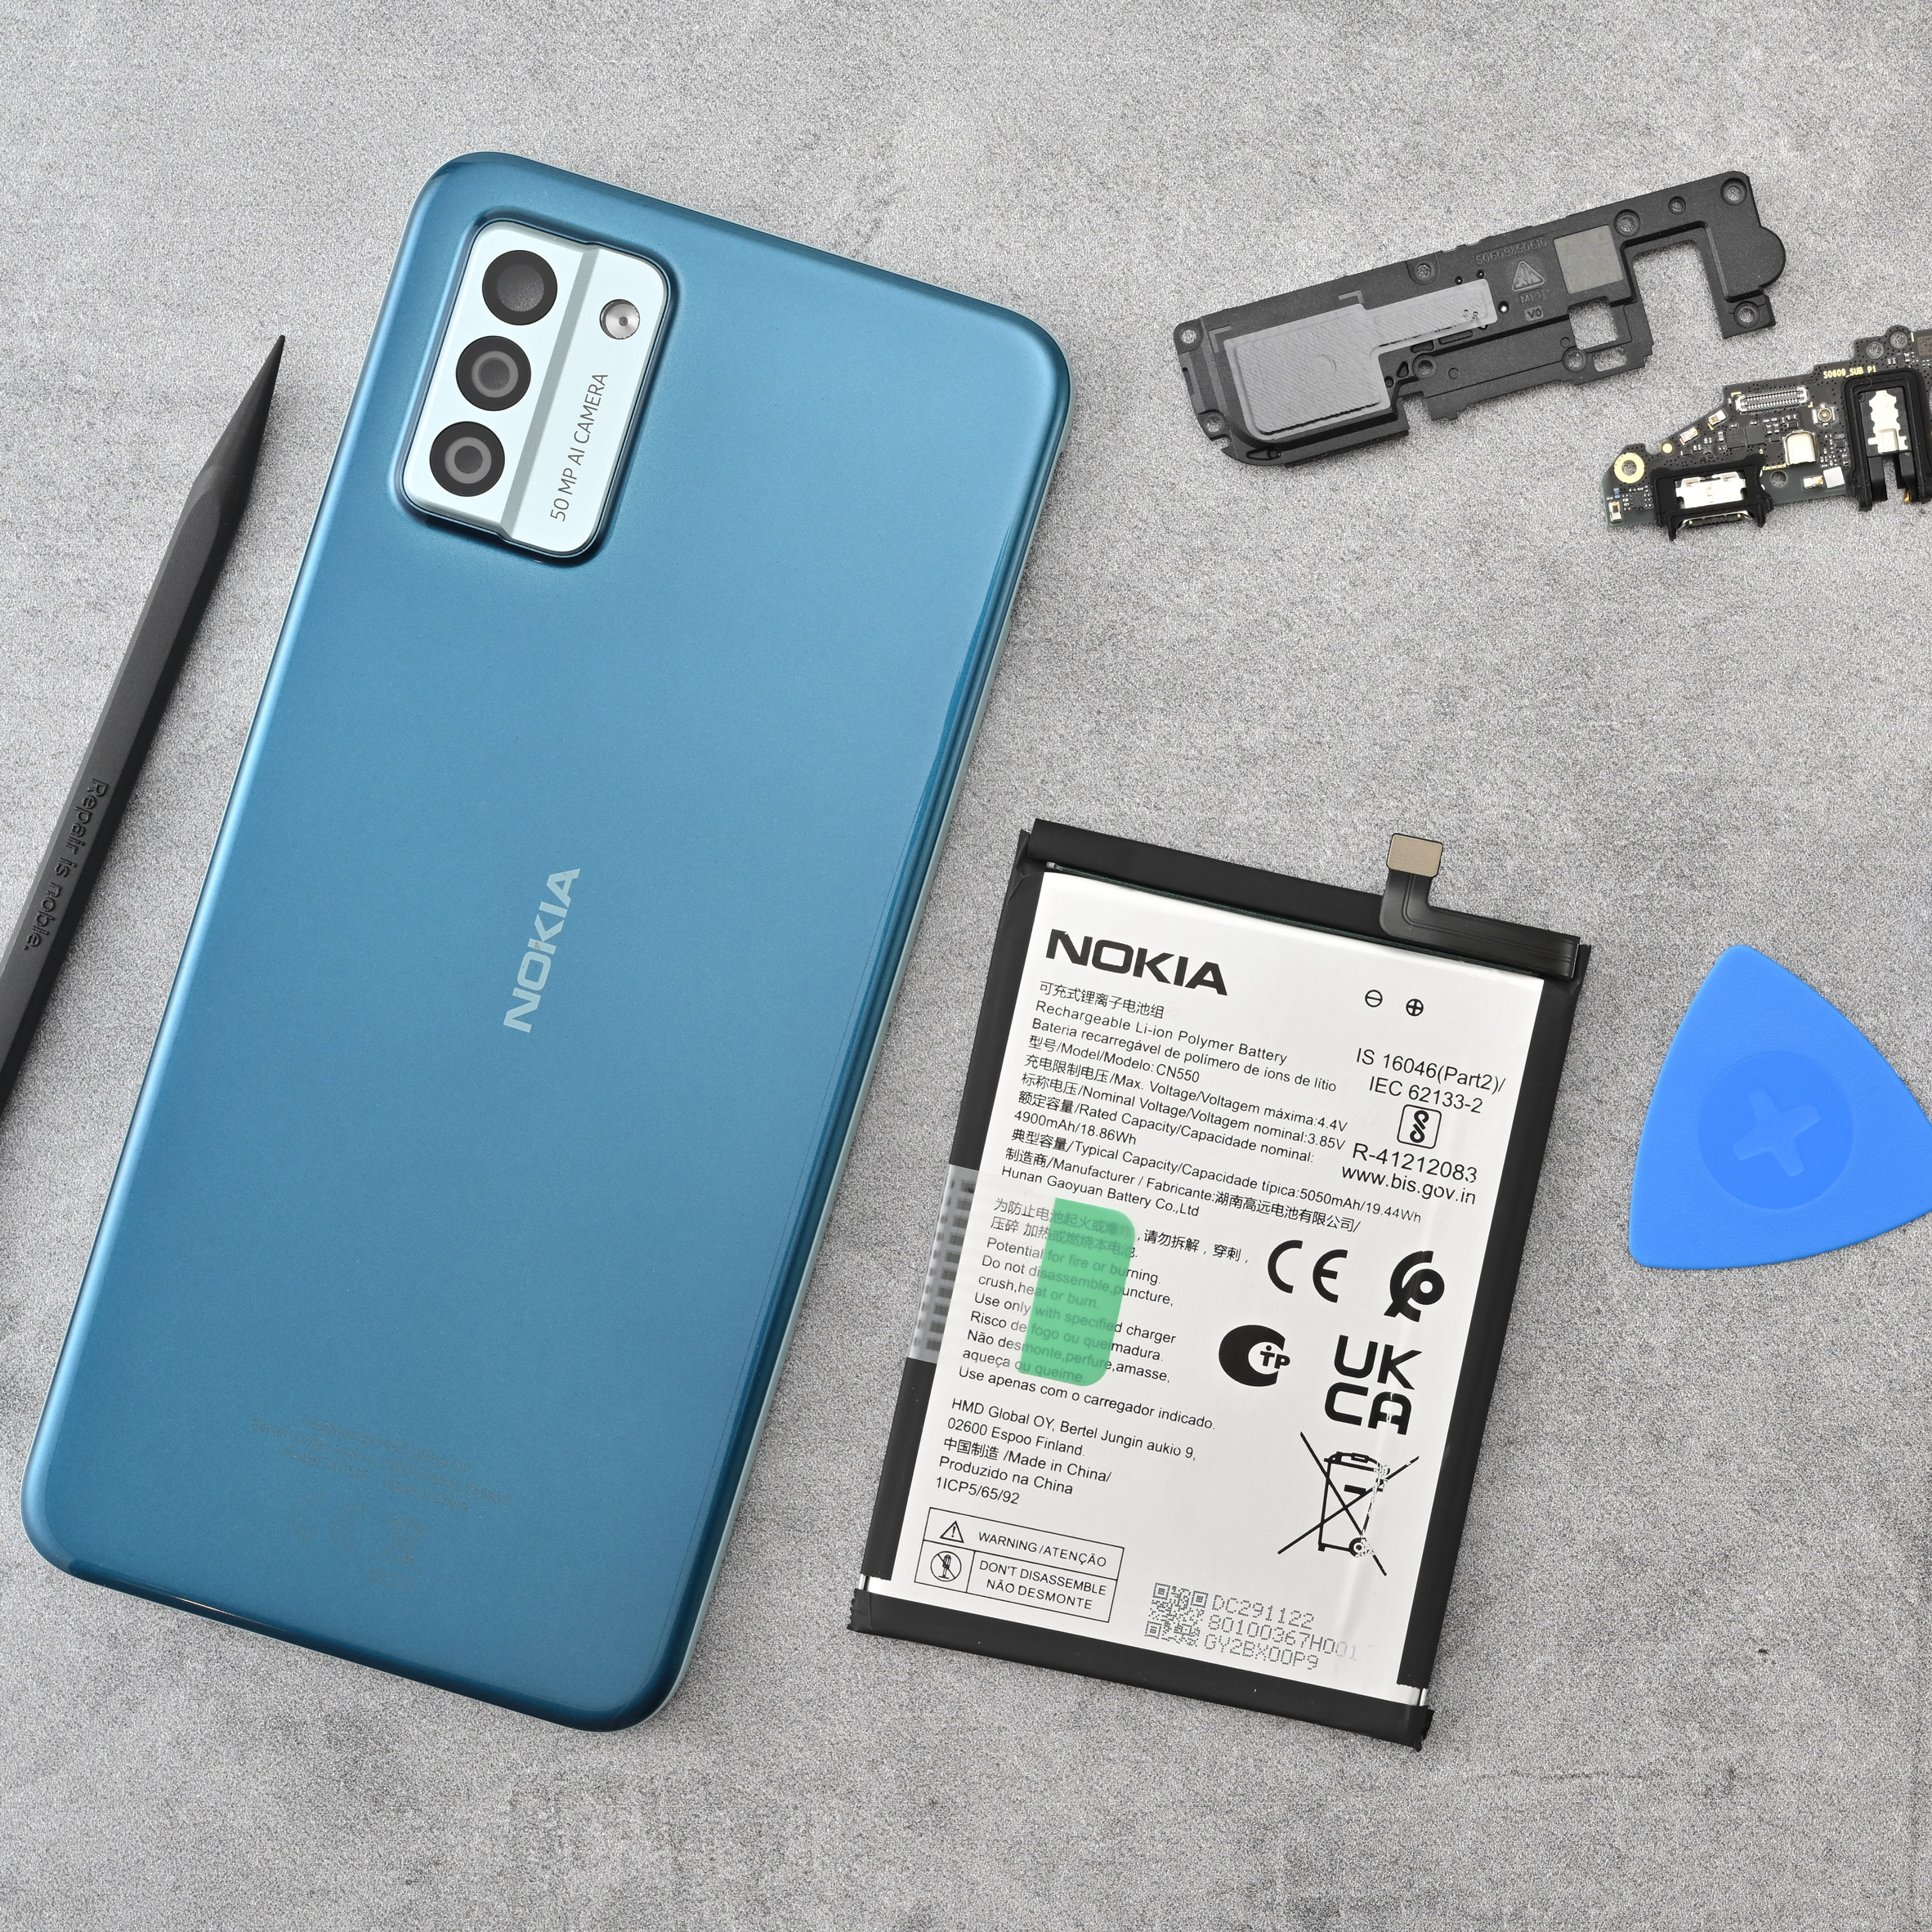 Nokia launches G22 smartphone with DIY repair kit